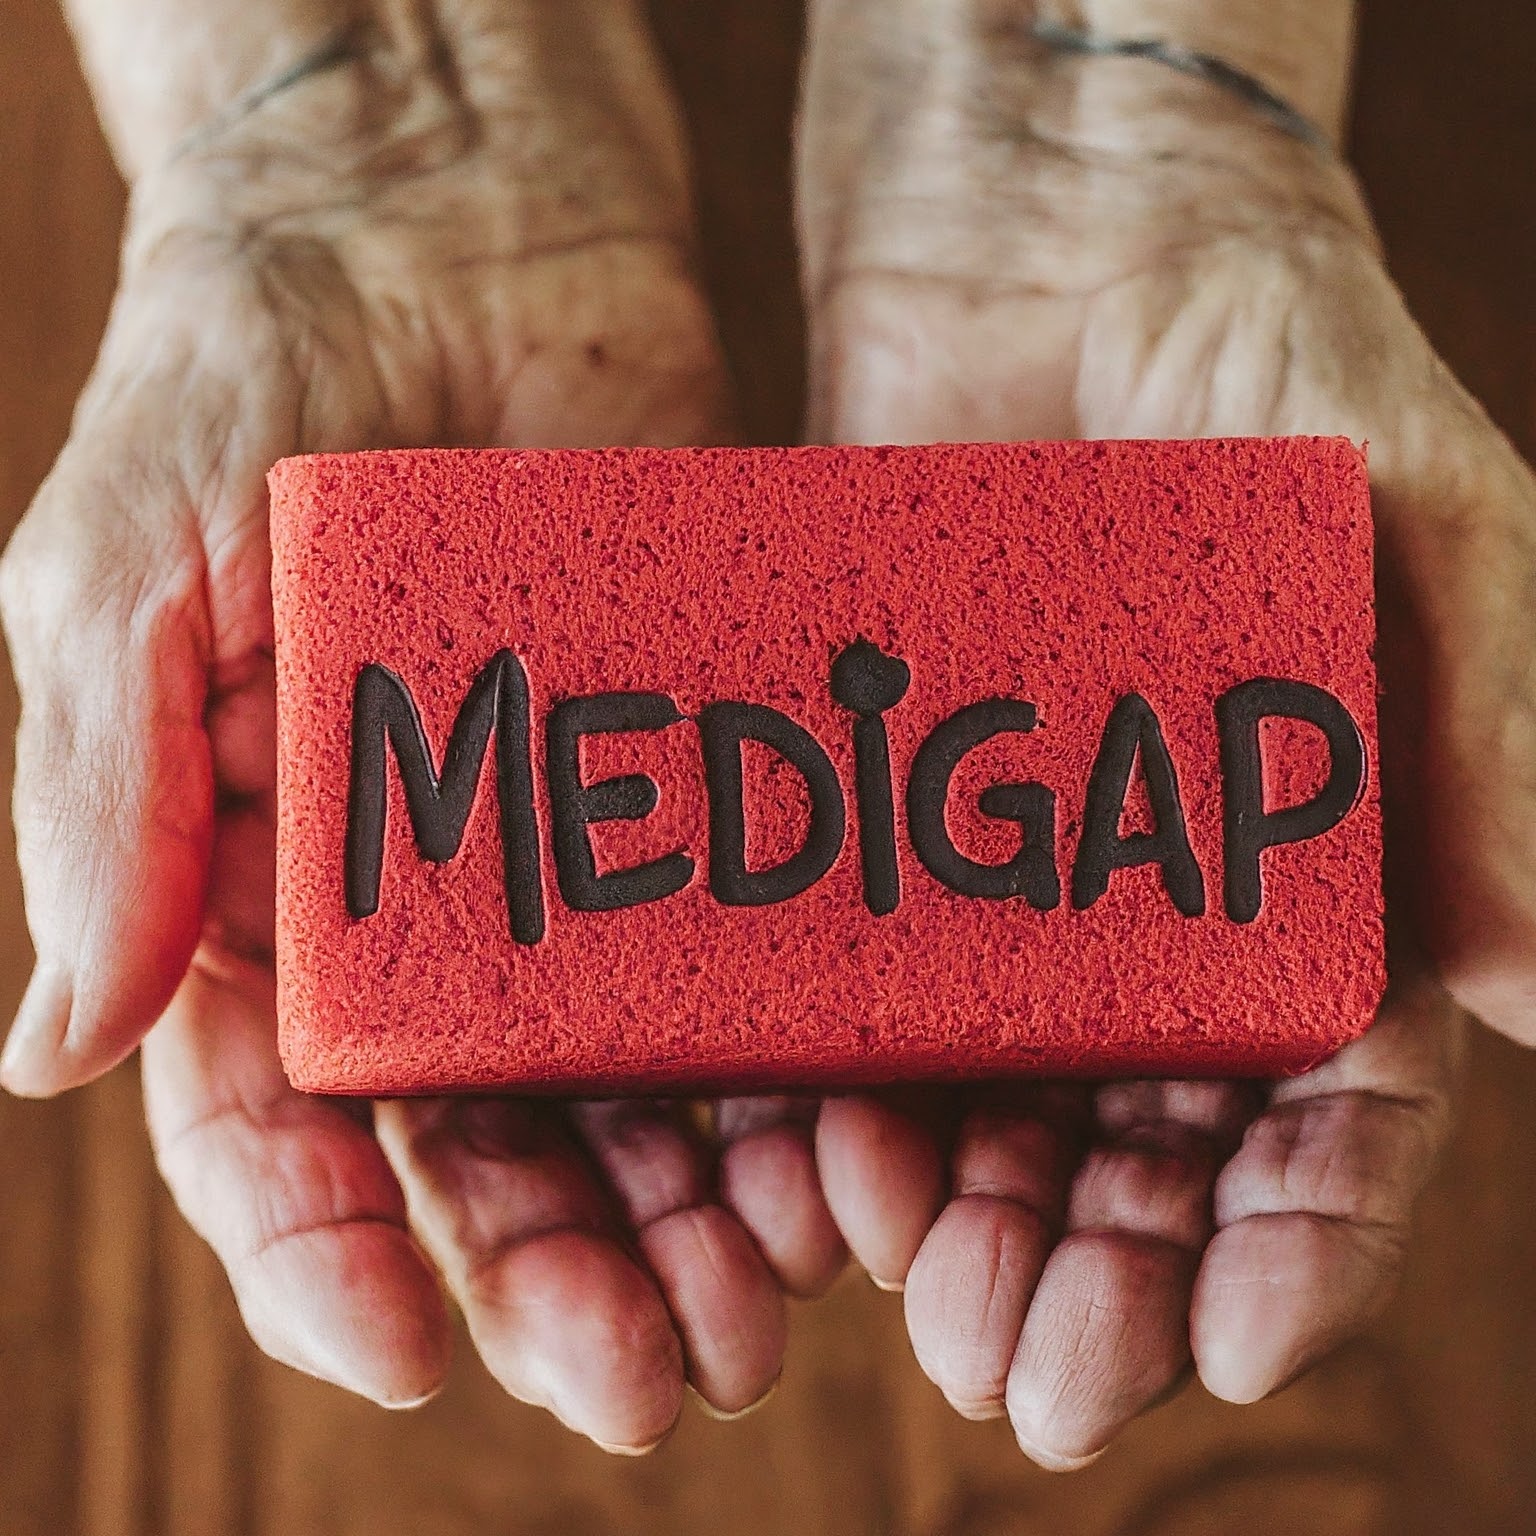 Hands holding out block that says "Medigap"